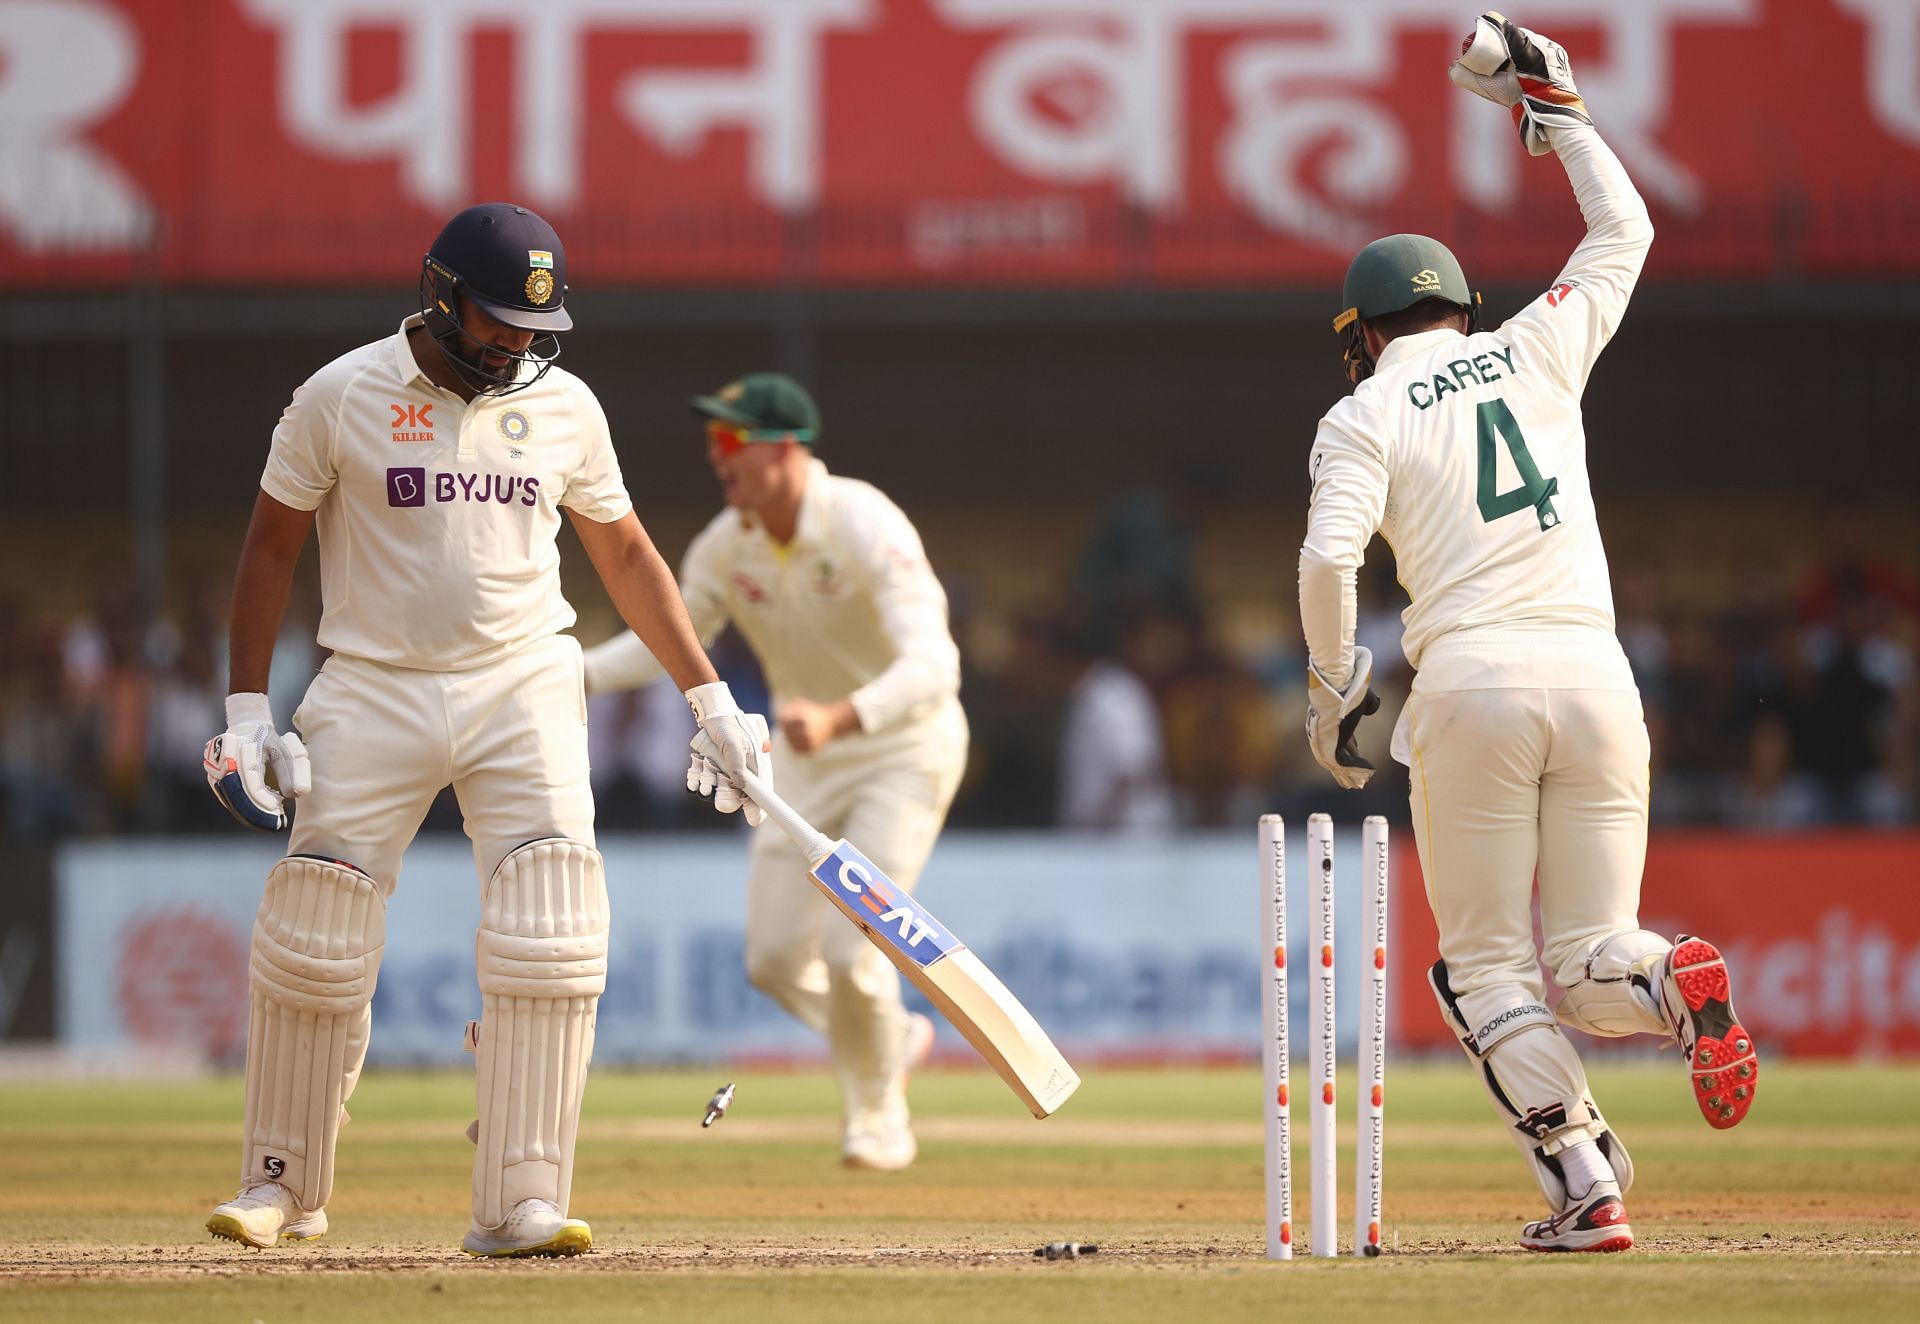 India-Australia 3rd test match: stunning shots of batsmen and bowlers in action